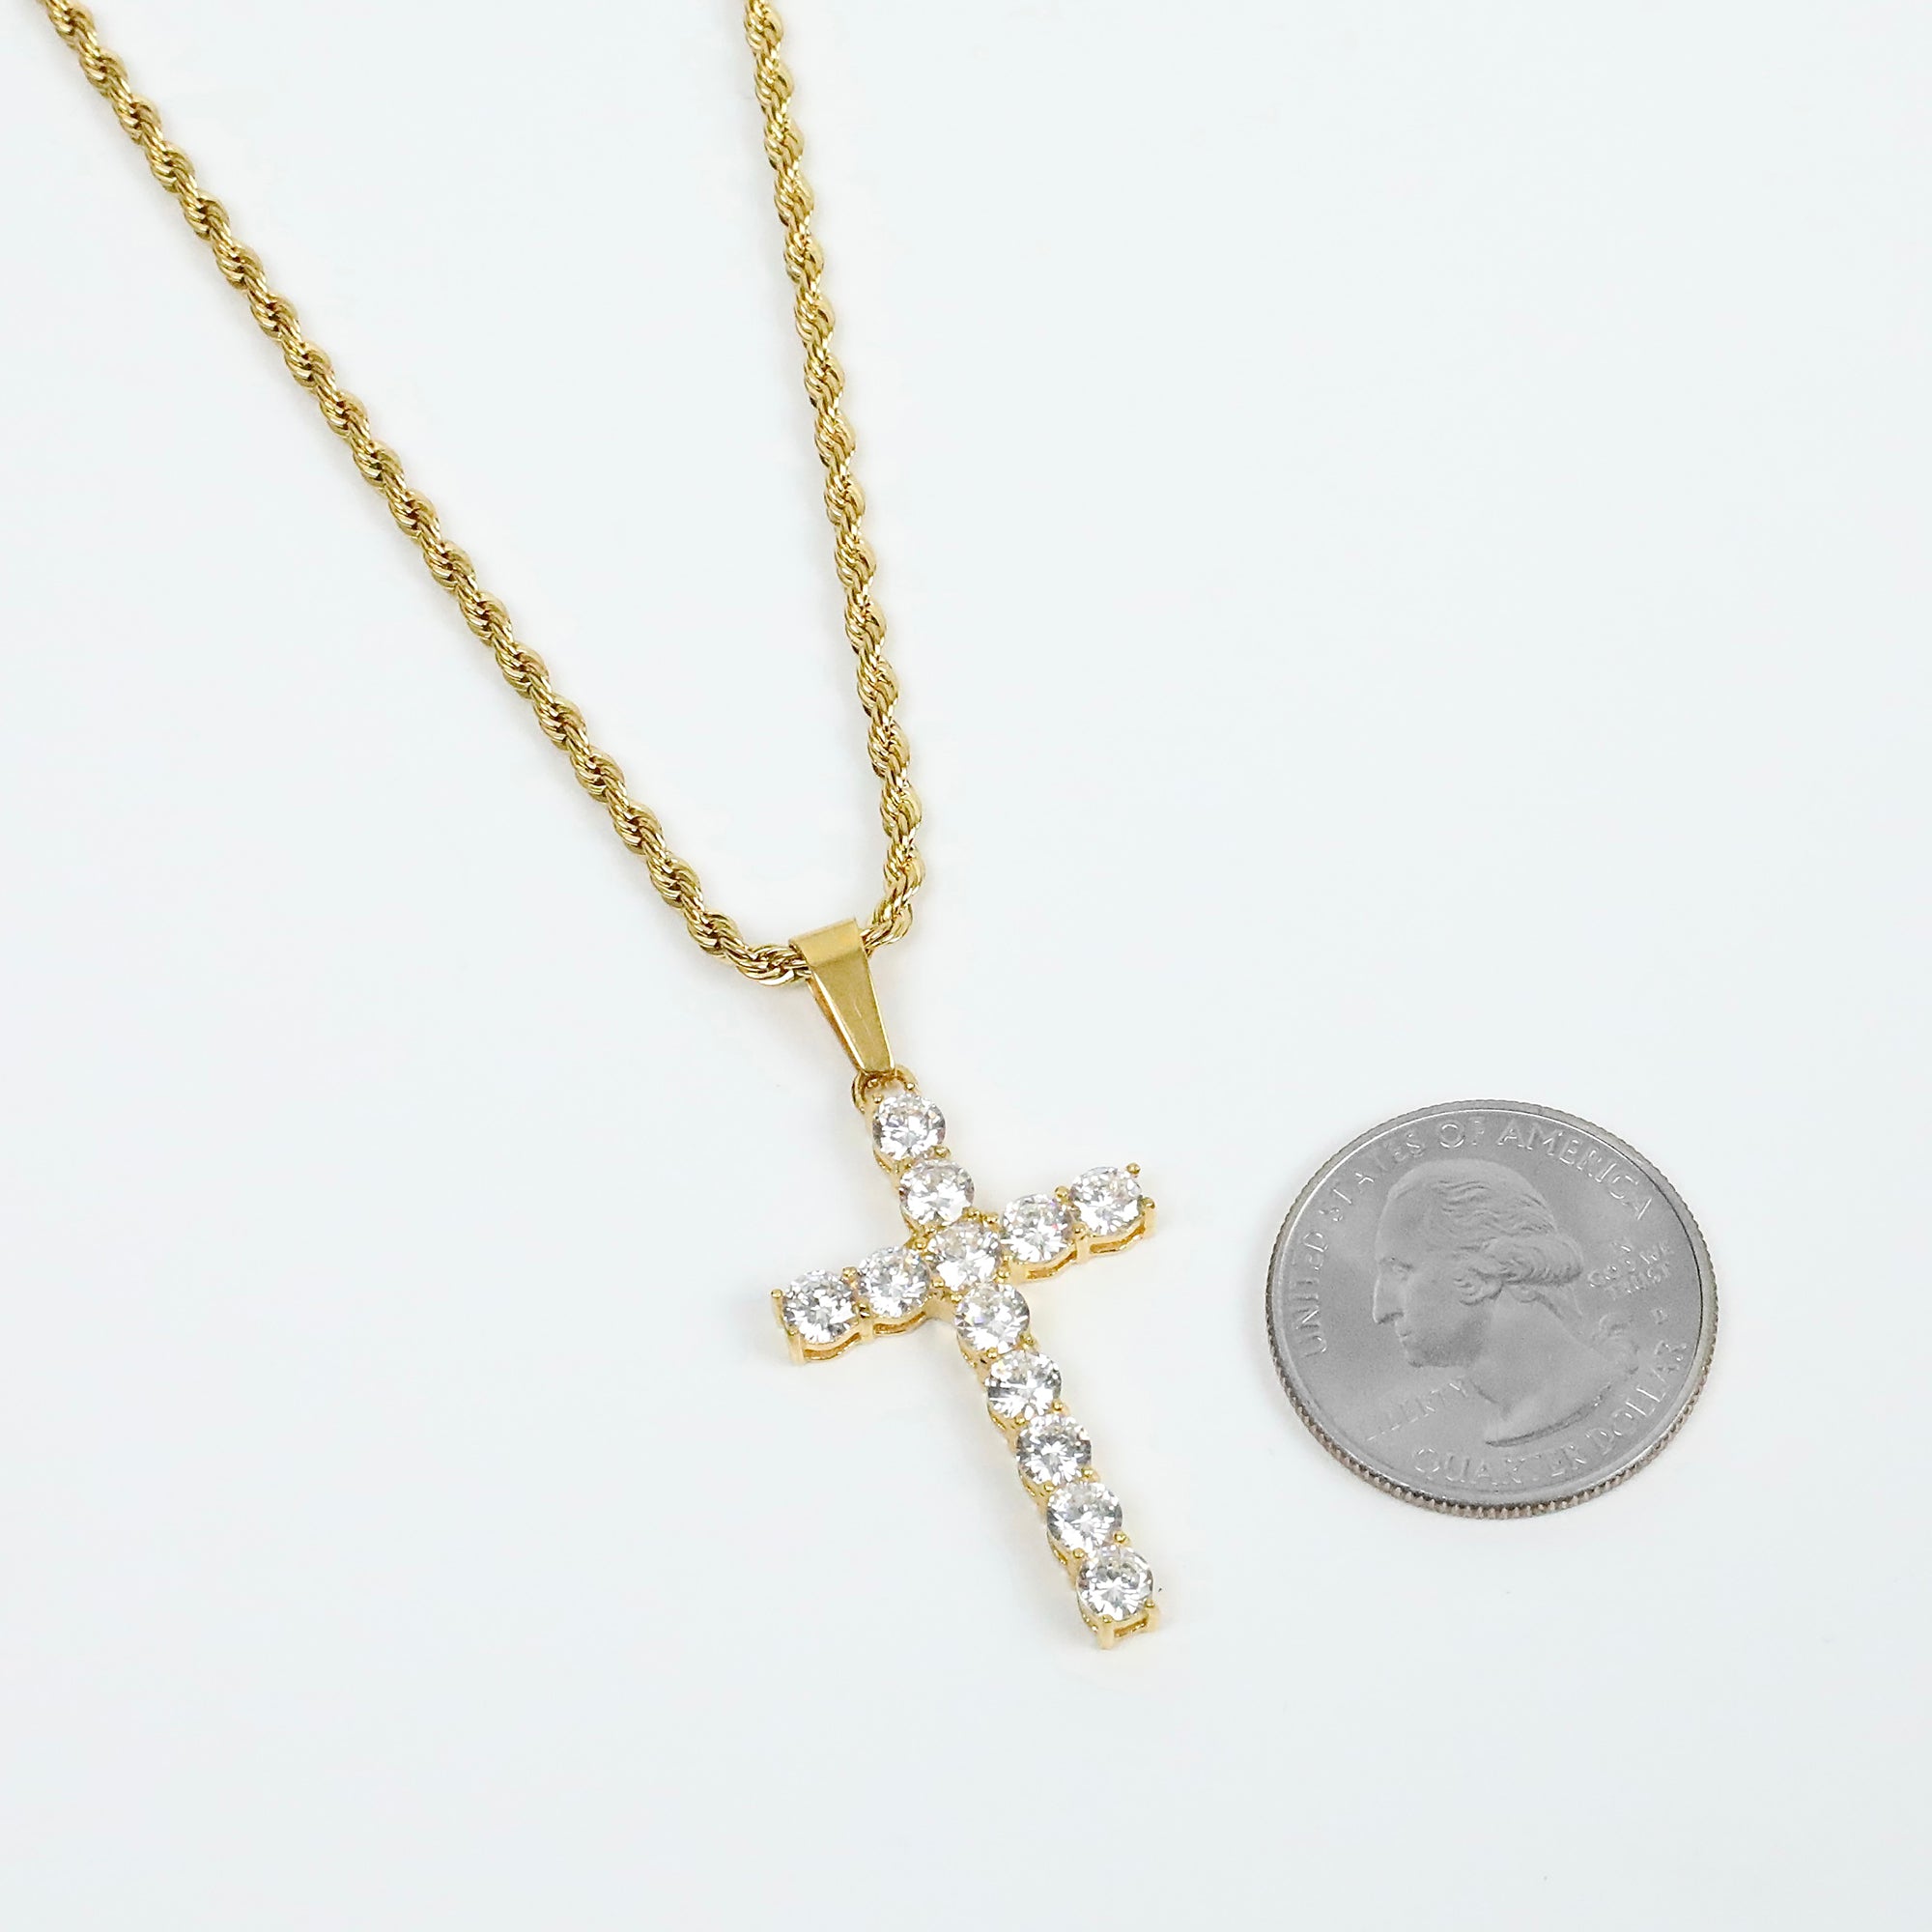 Ice Cross Necklace - Gold